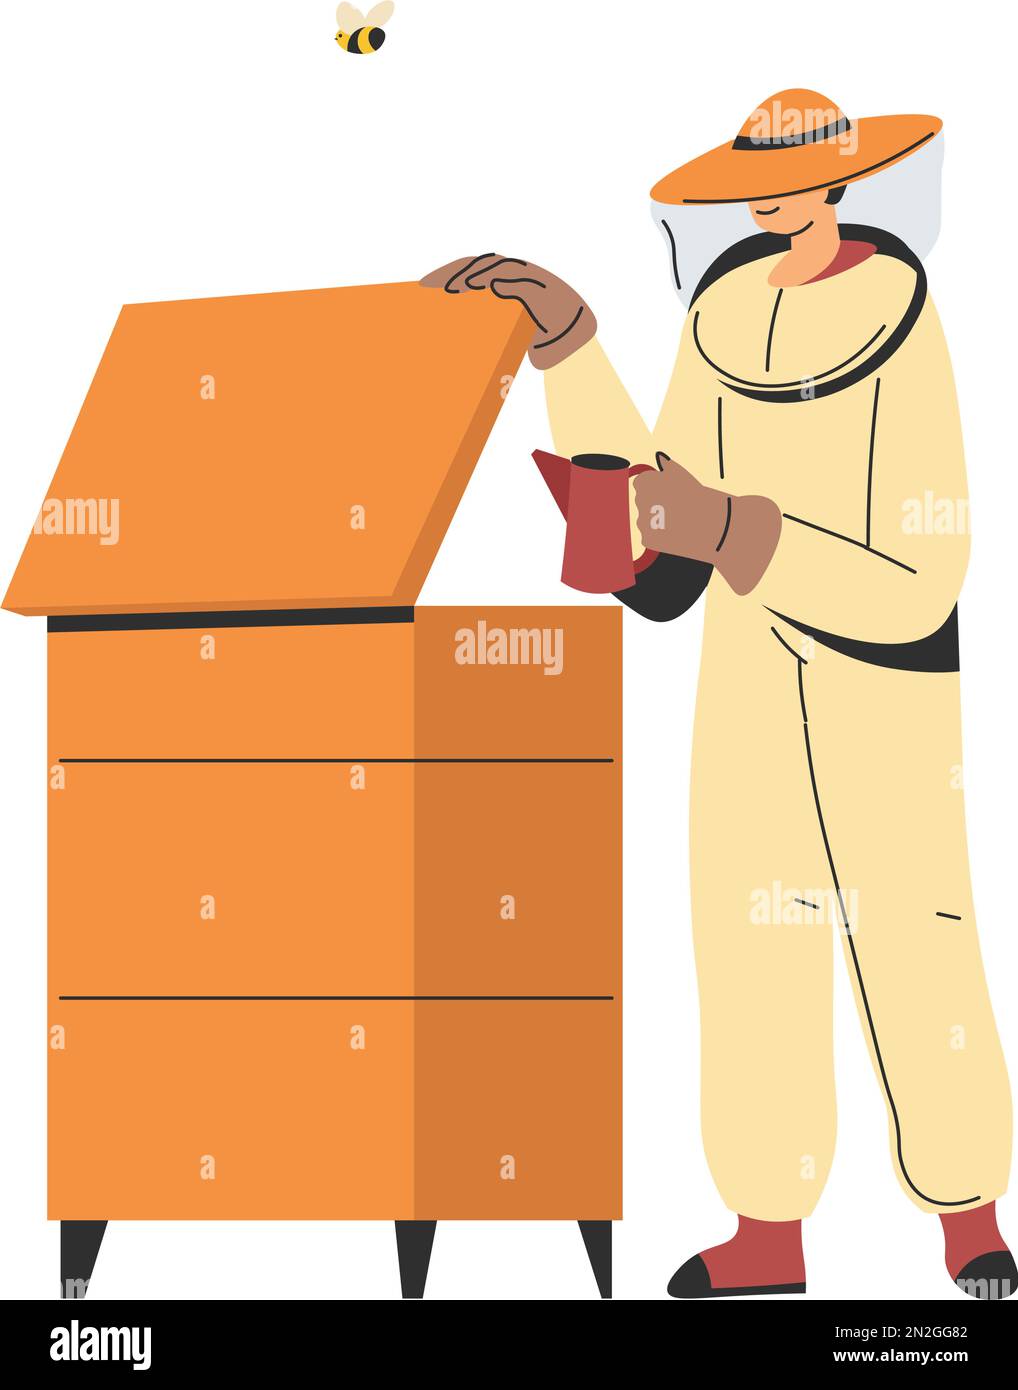 Organic honey production and beekeeping hobby. Isolated apiculturist wearing protective suit caring for hive. Apiculture and farming, producing natura Stock Vector